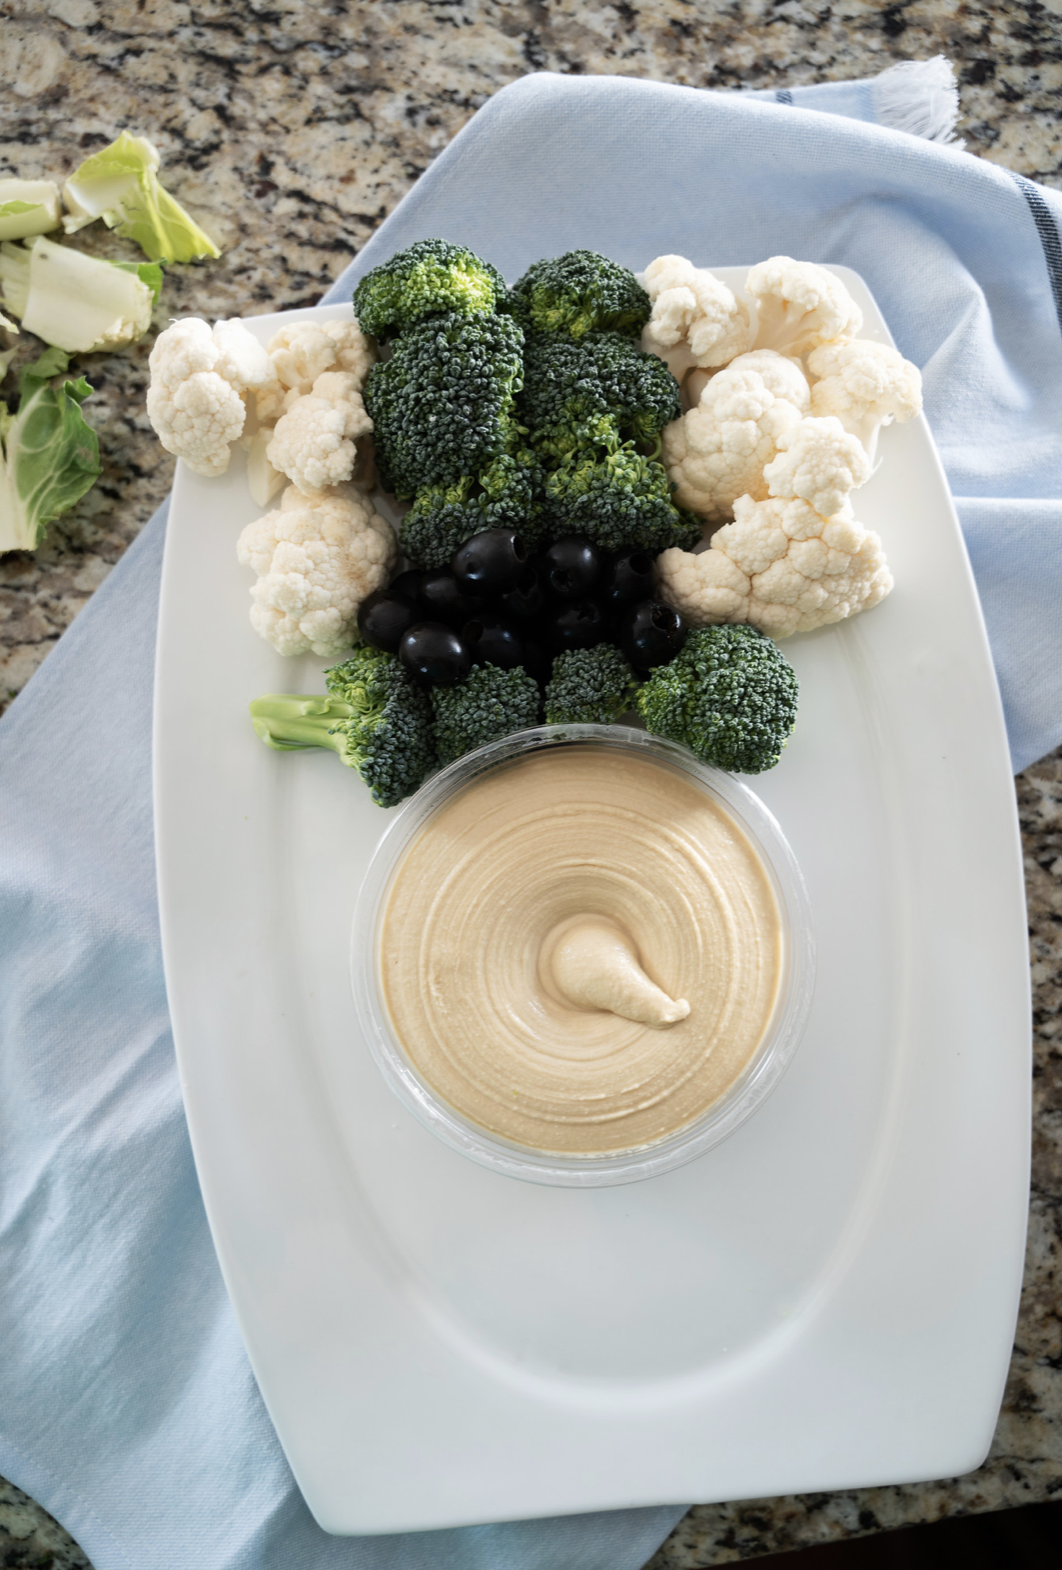 Hummus has Face and build out of hat with broccoli and cauliflower